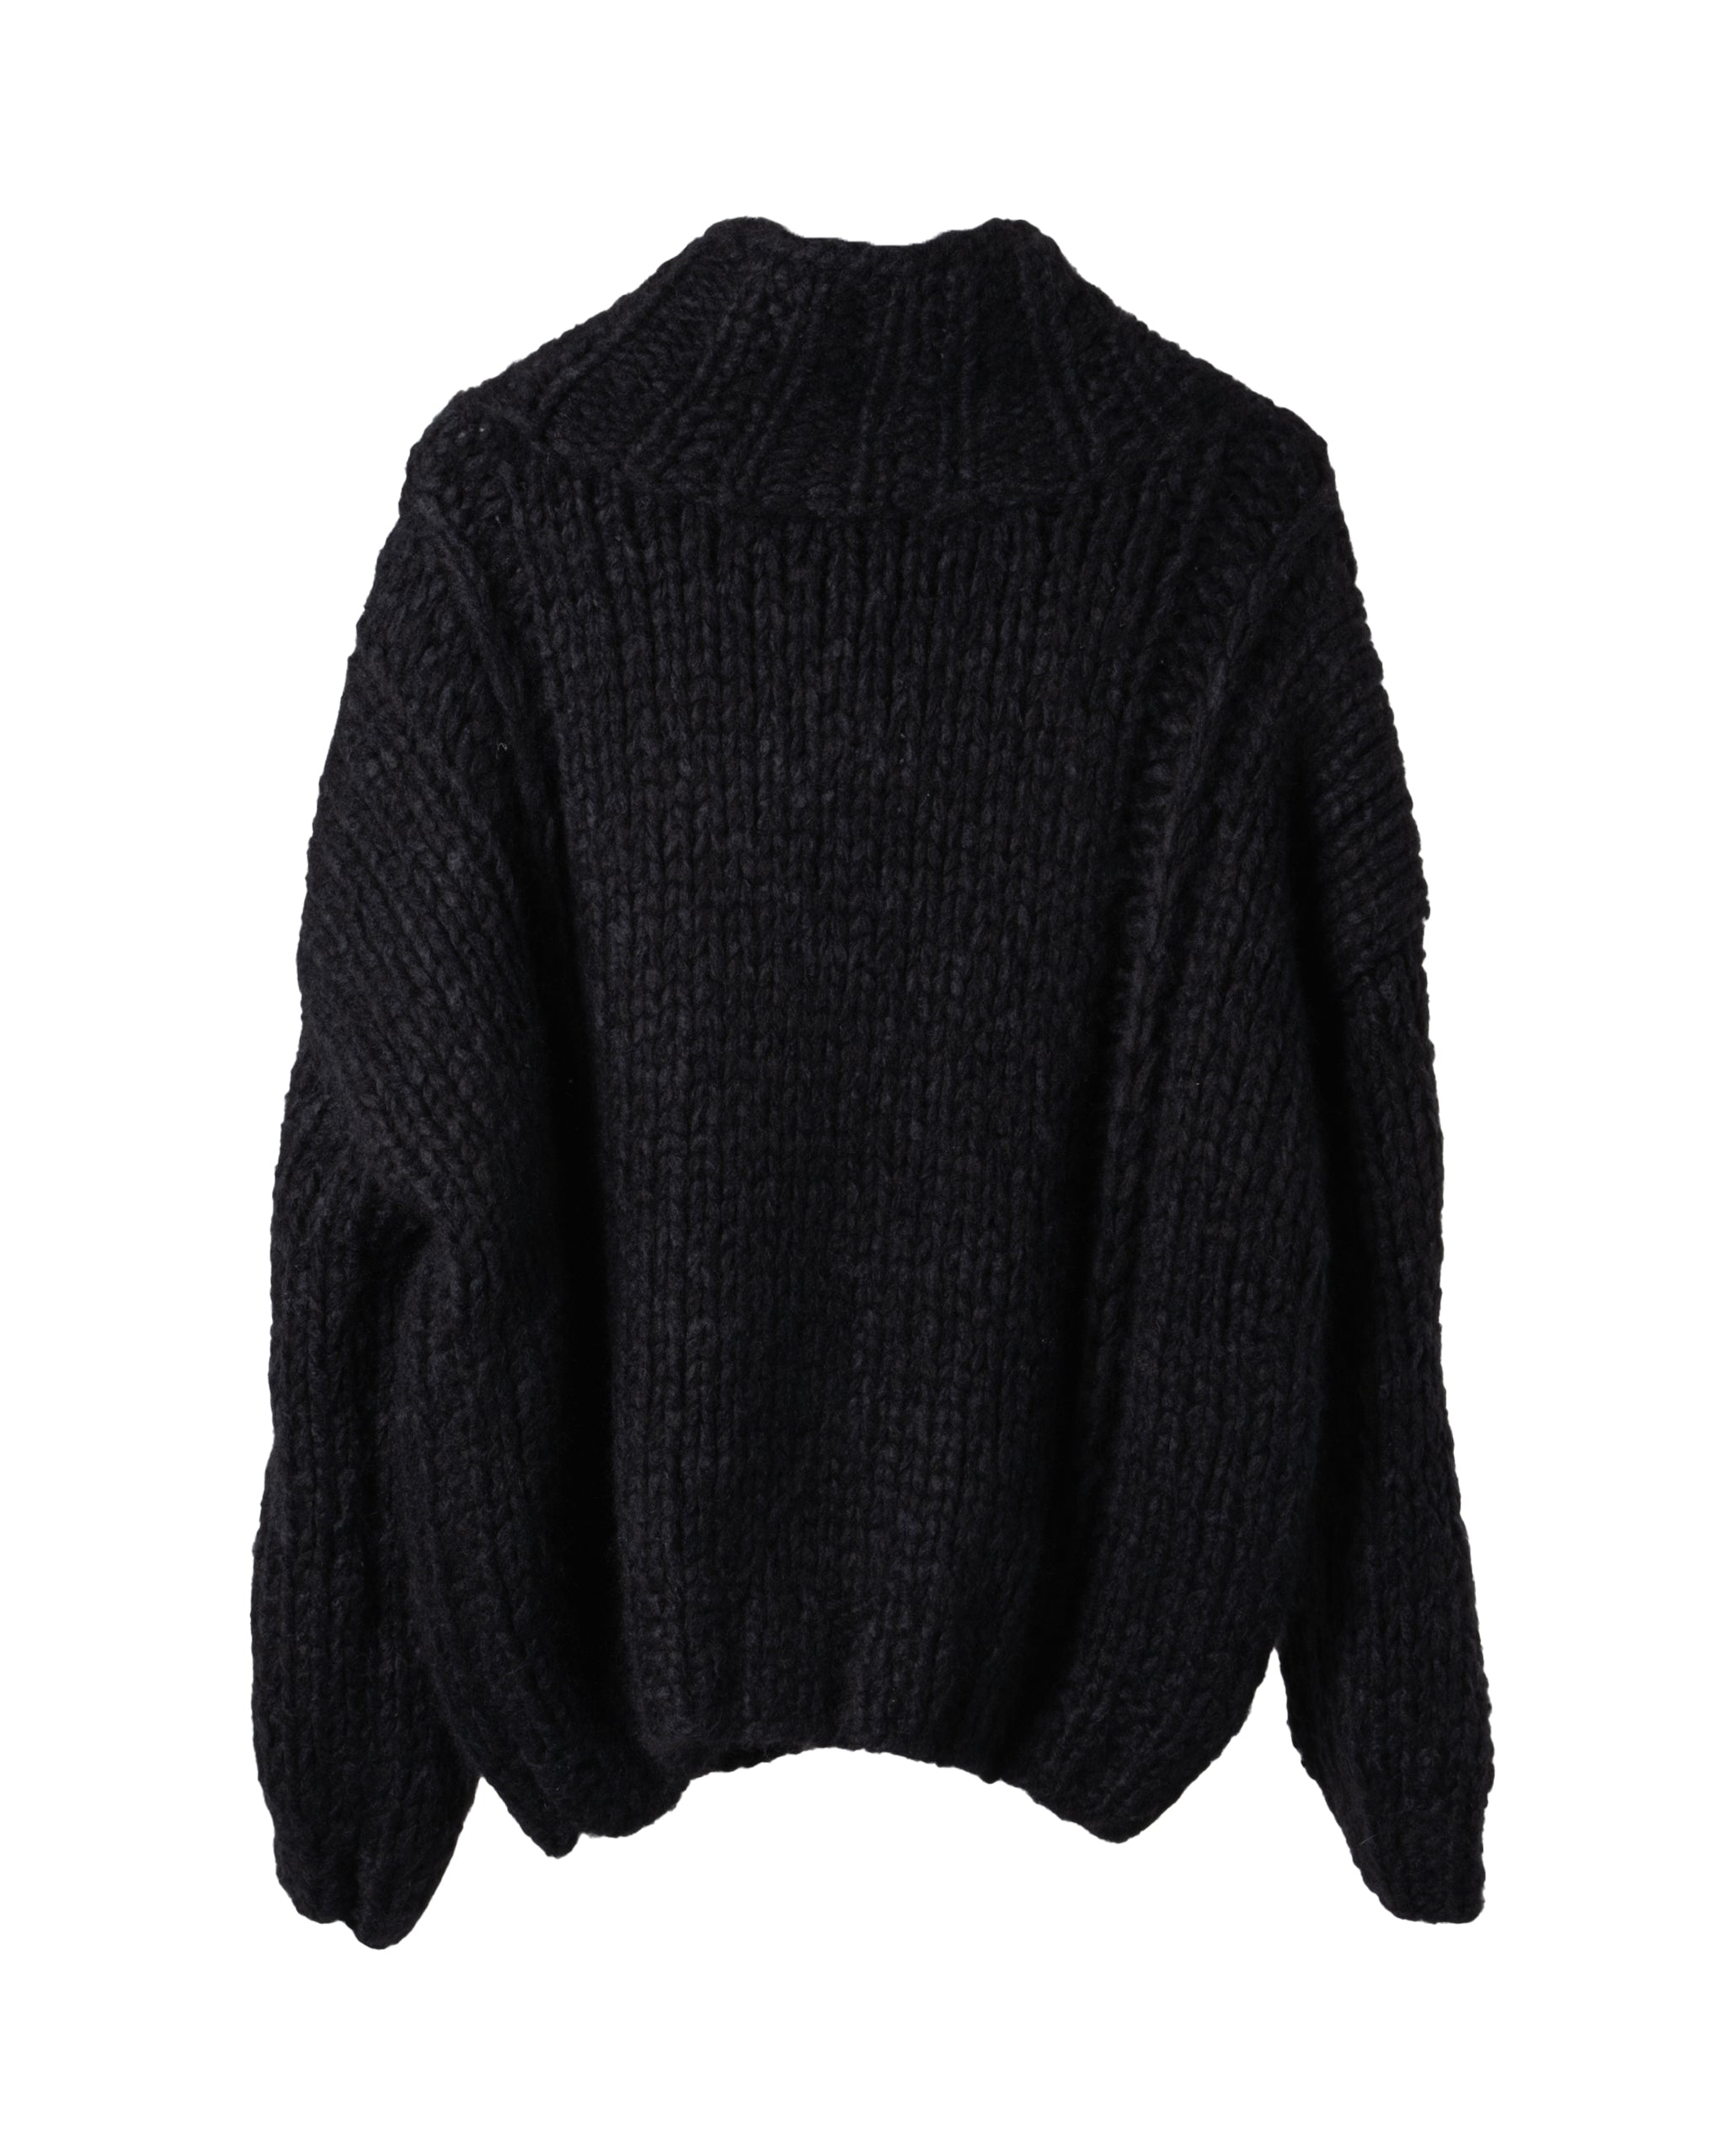 TWISTED CHUNKY CASHMERE TURTLE NECK SWEATER